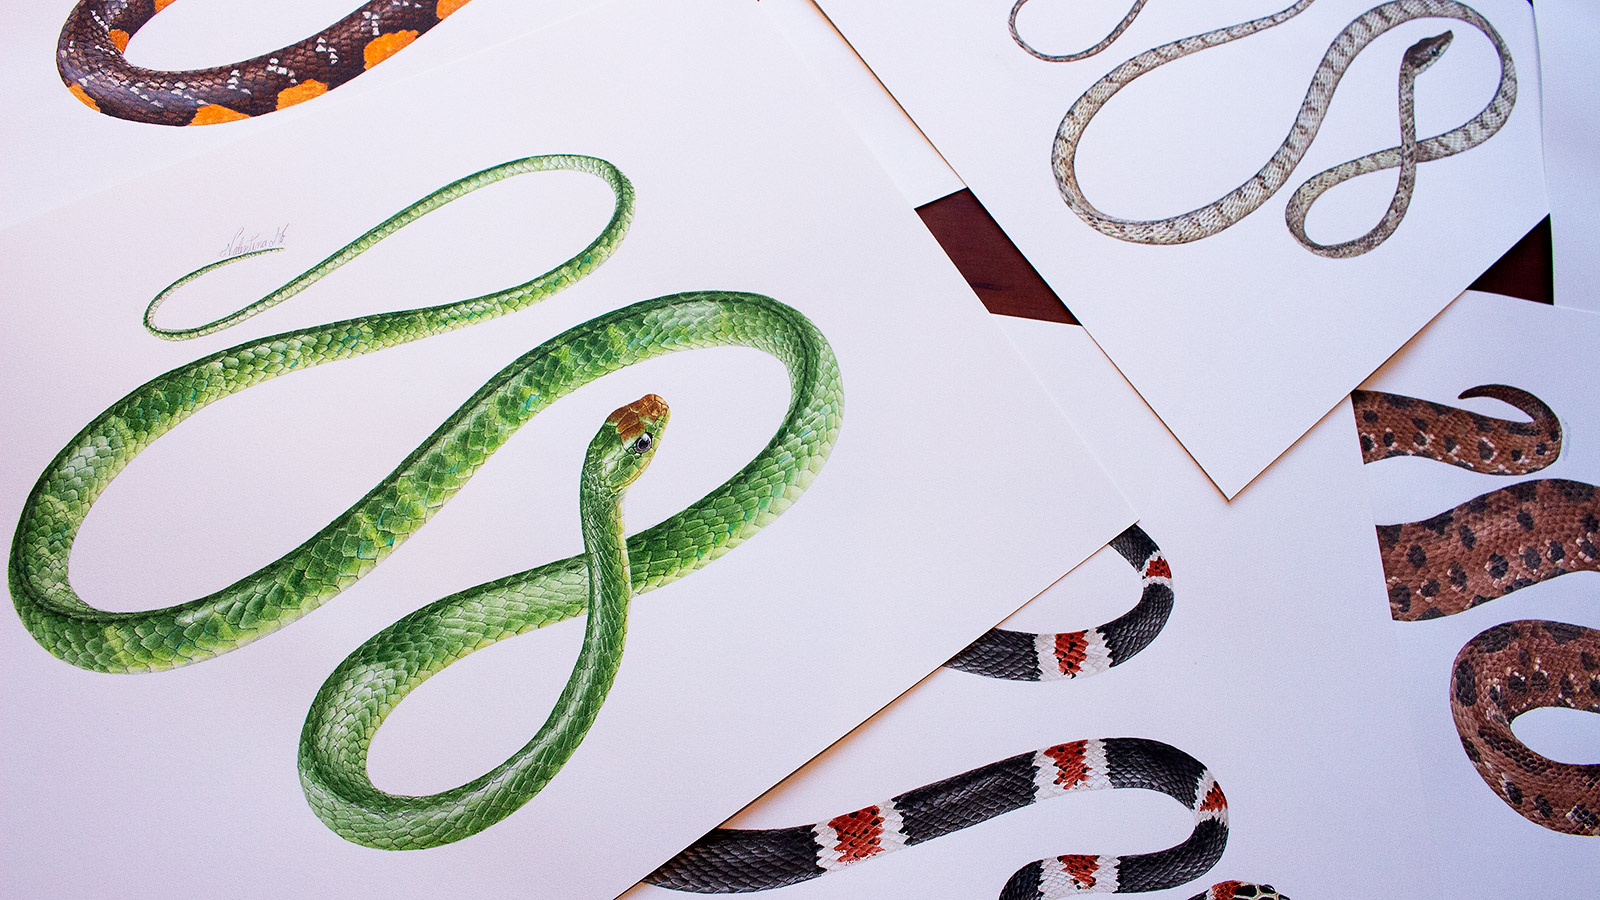 Illustrations created by artist Valentina Nieto for the Reptiles of Ecuador book